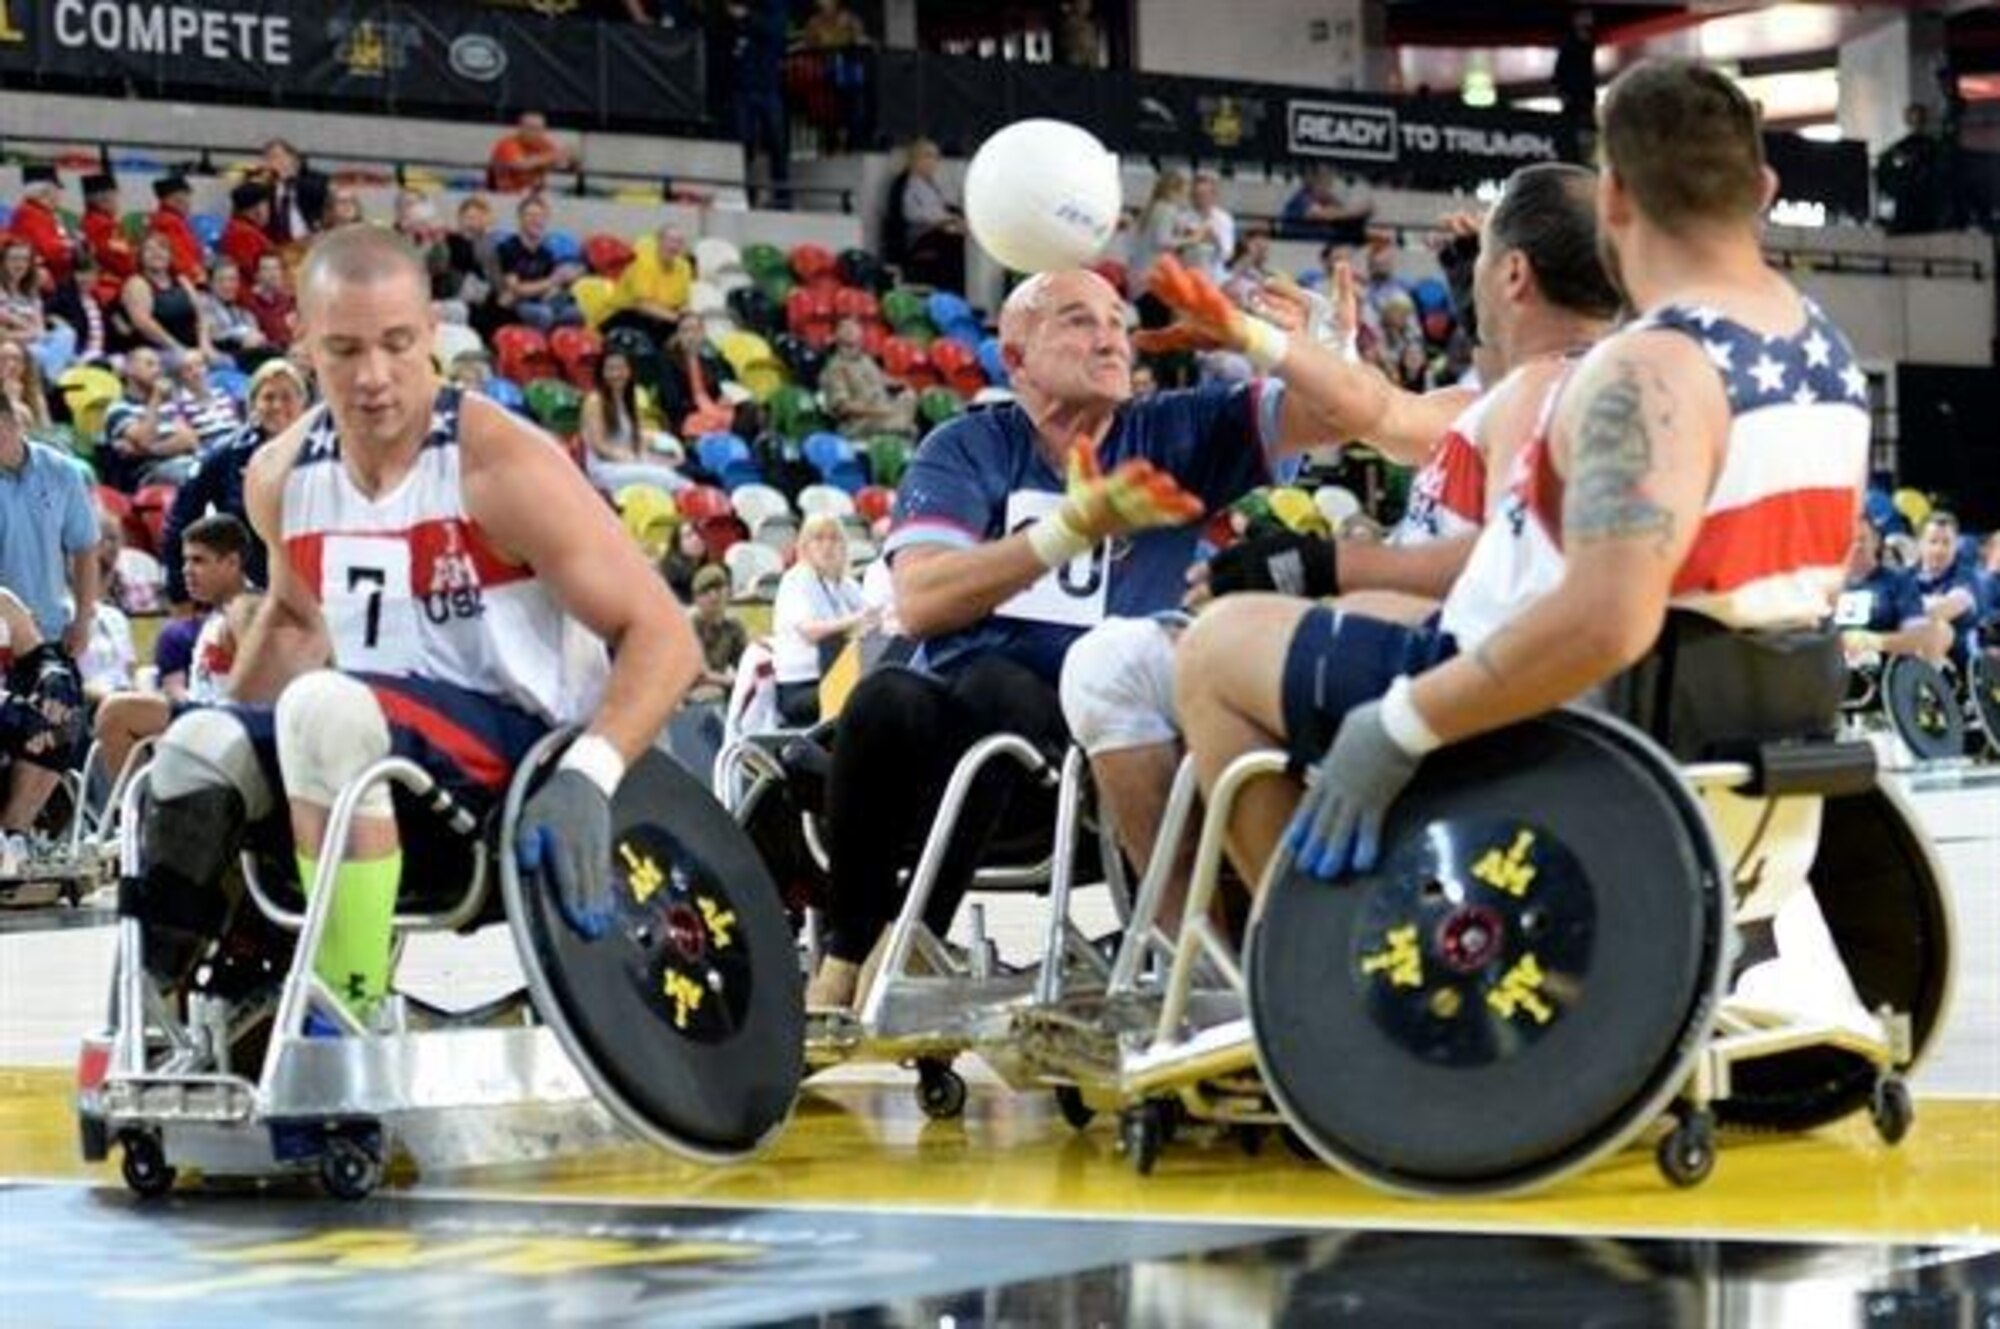 Three American defenders knock the ball away from an Australian player during a wheelchair rugby match Sept. 12, 2014, at the 2014 Invictus Games in London. The U.S. won the match 14-4. Invictus Games is an international competition that brings together wounded, injured and ill service members in the spirit of friendly athletic competition. American Soldiers, Sailors, Airmen and Marines are representing the U.S. in the competition which is taking place Sept. 10-14. (U.S. Navy photo/Mass Communication Specialist 2nd Class Joshua D. Sheppard)
